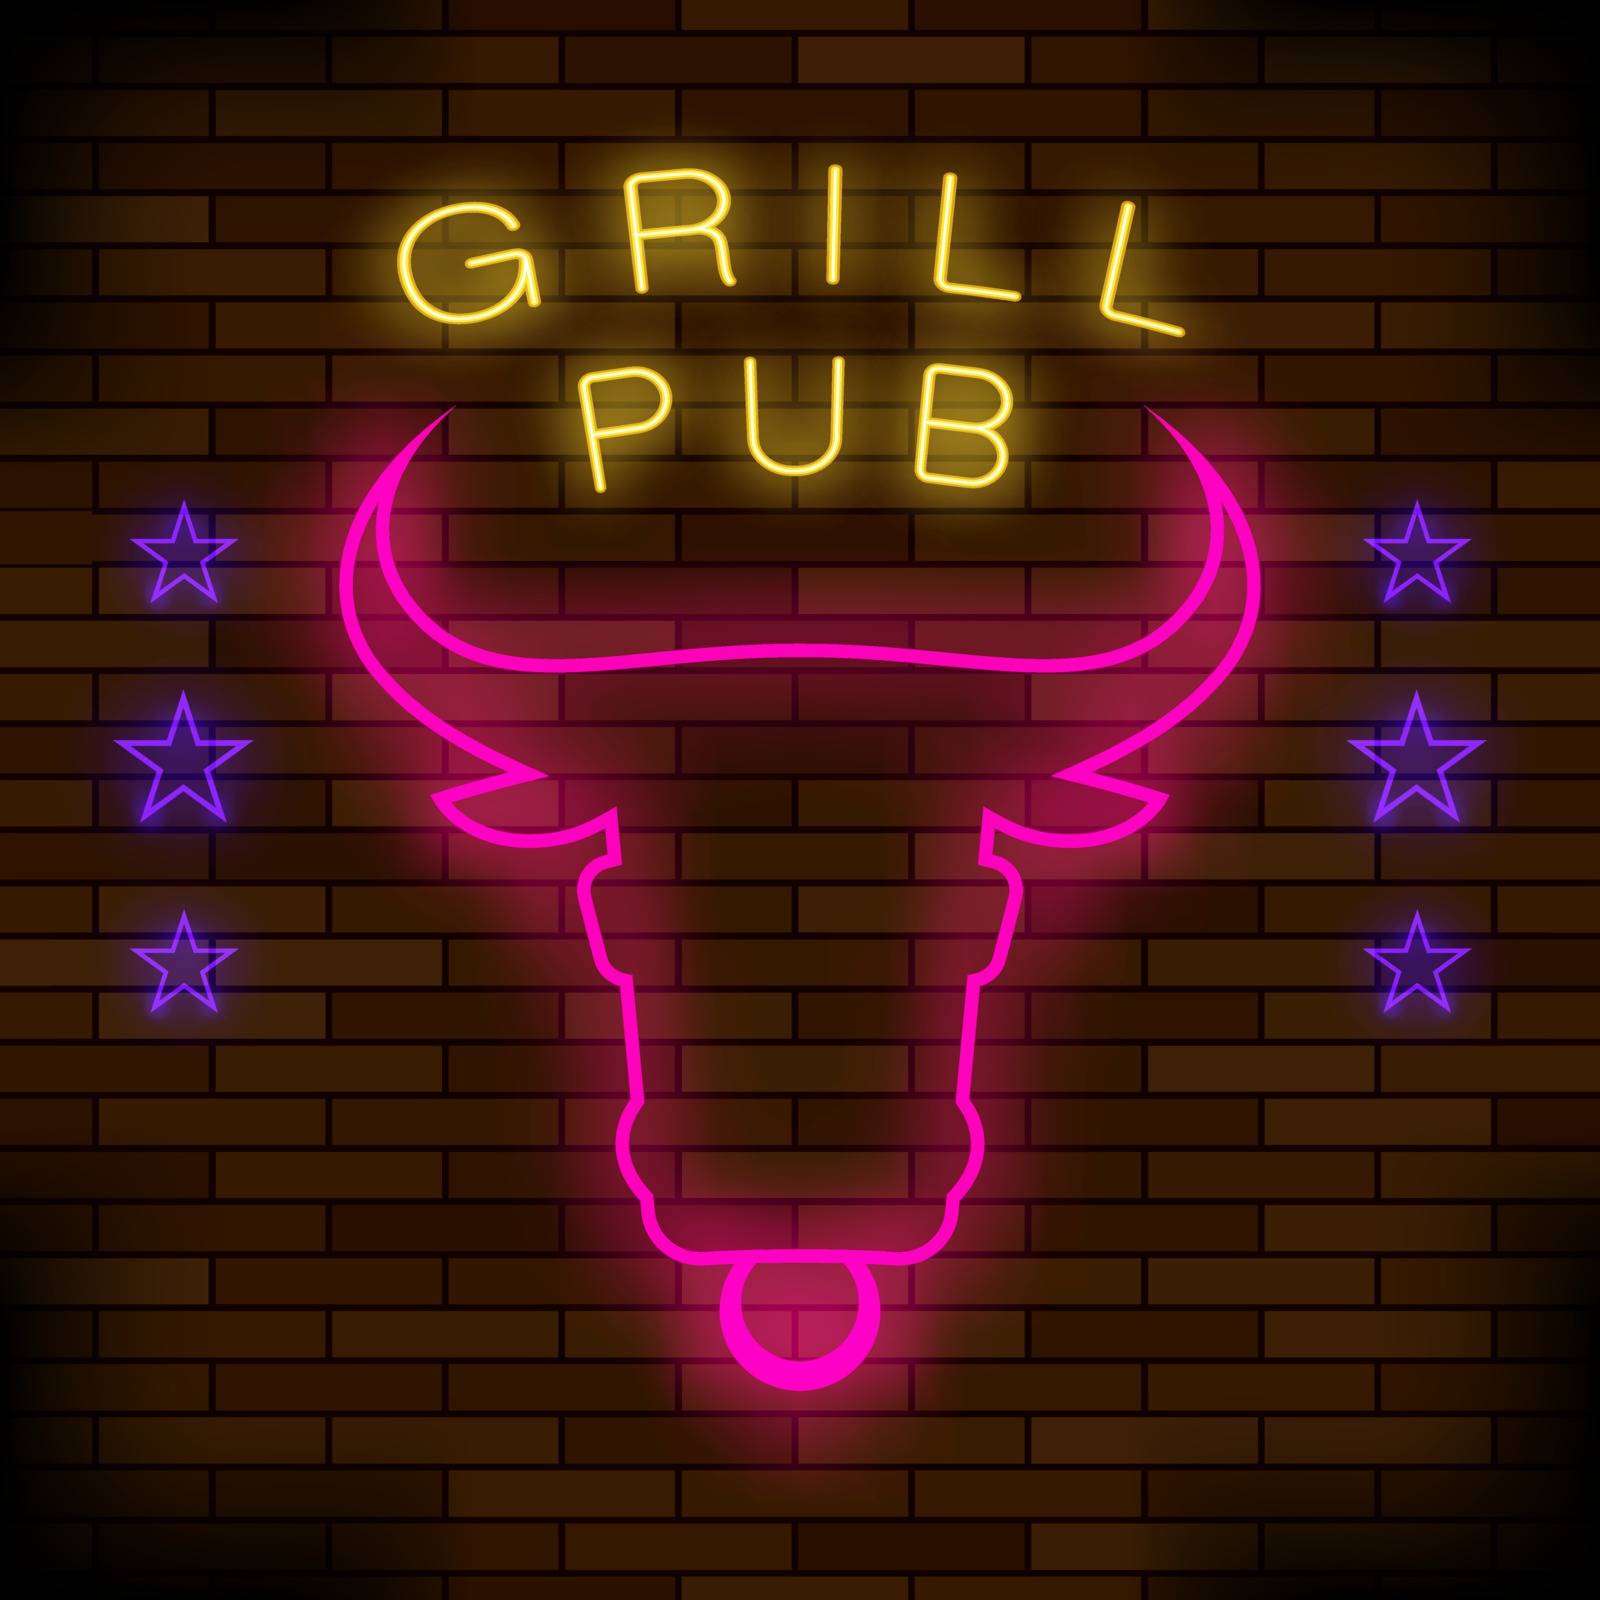 Grill Pub Neon Colorful Sign on Dark Brick Background. Night City Banner